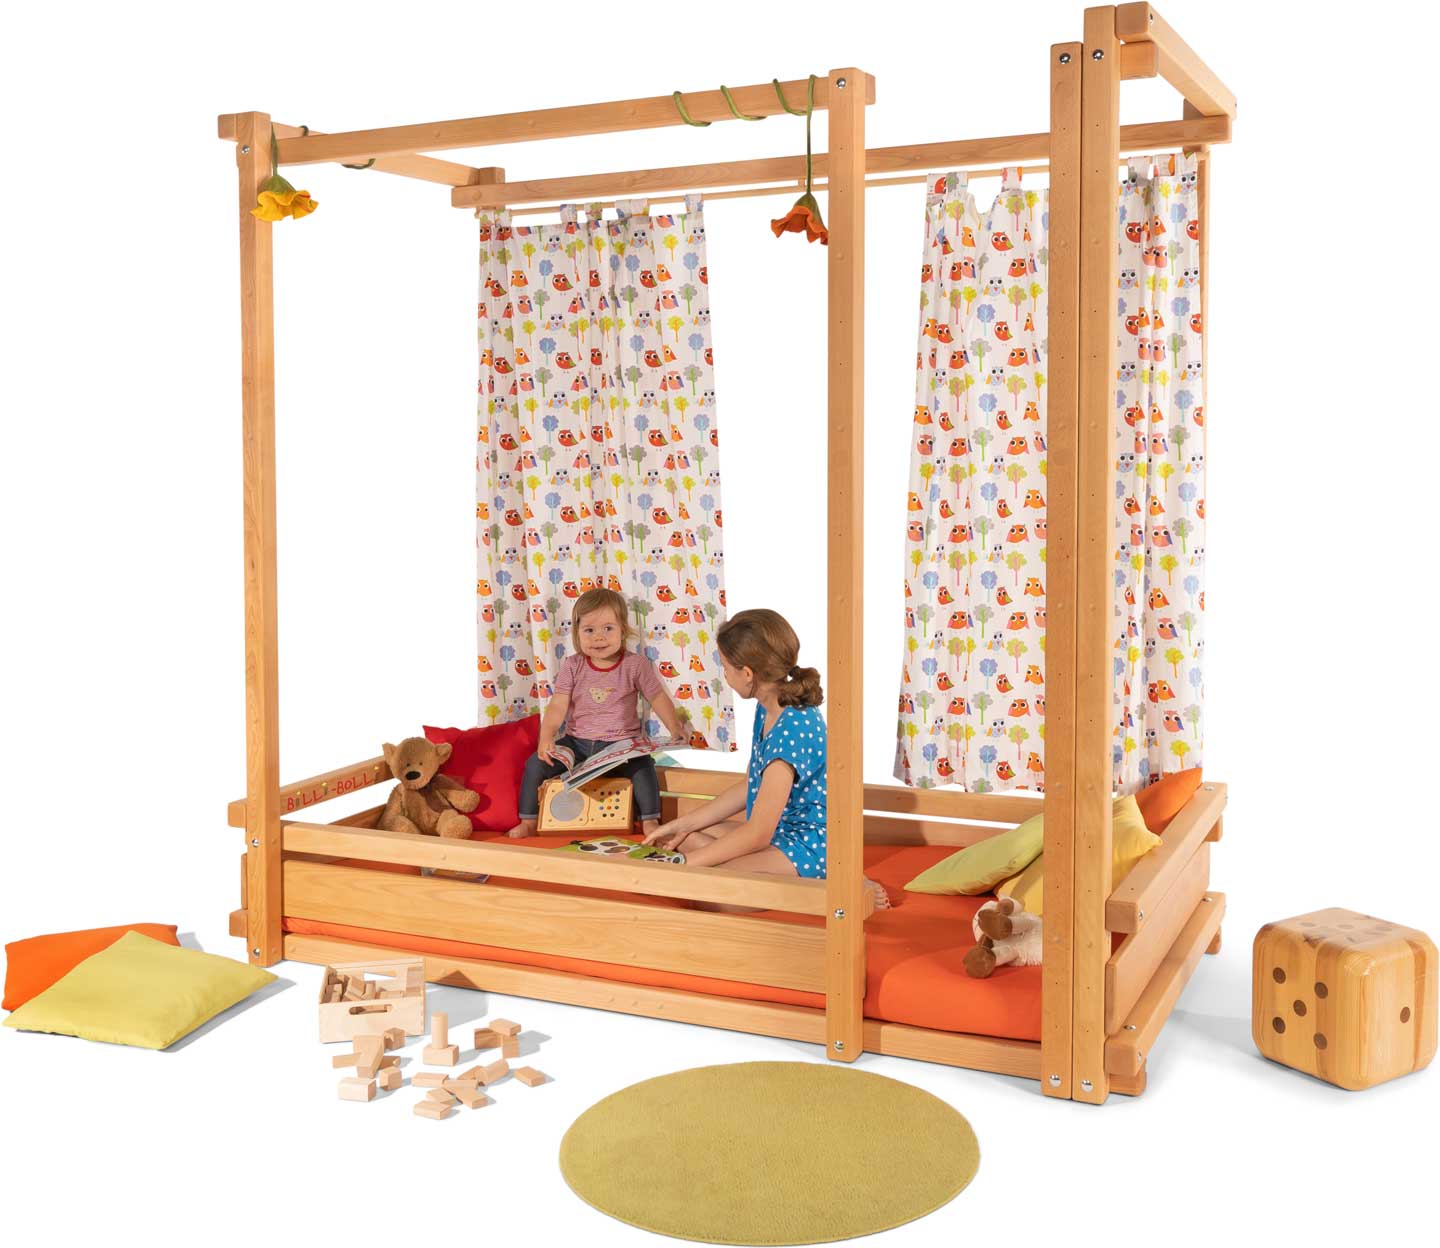 The Loft Bed Adjustable by Age in beech, assembled at height&nbsp;1. Pictured with Curtains and mattress Nele Plus.